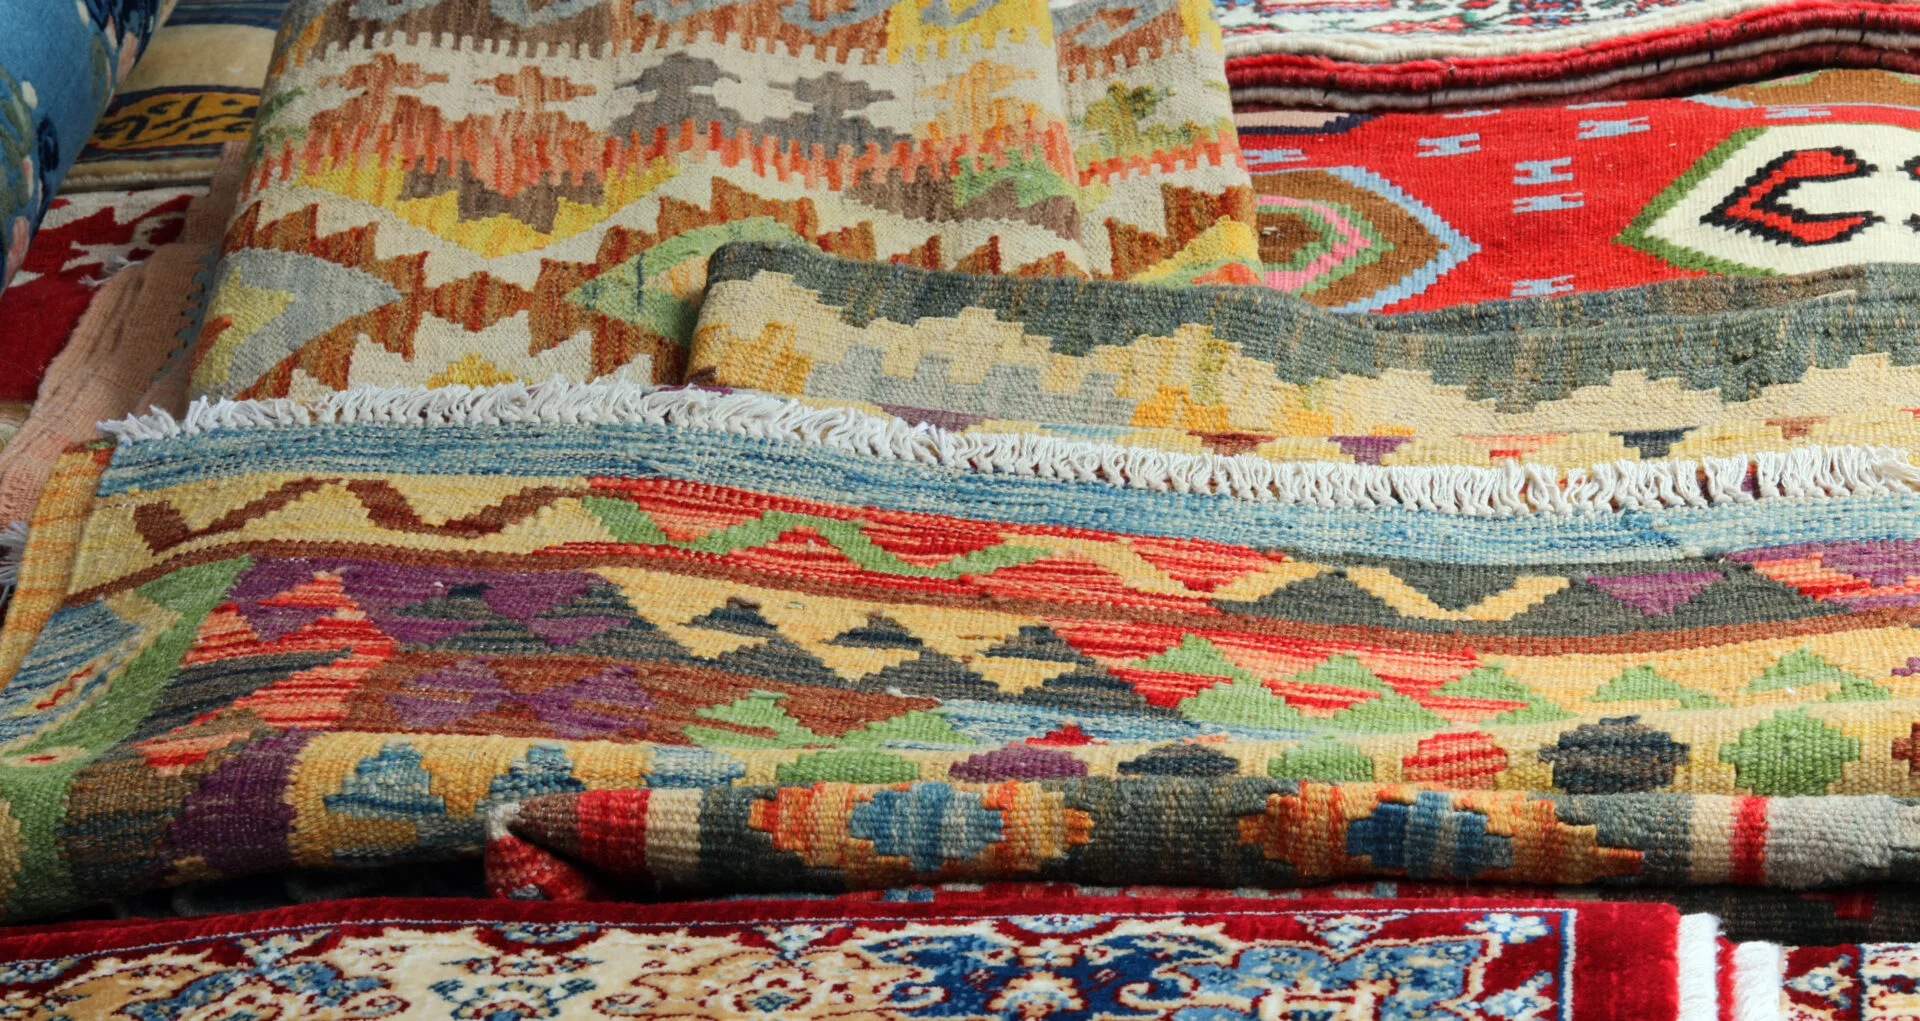 background of many carpets and kilim rugs for sale